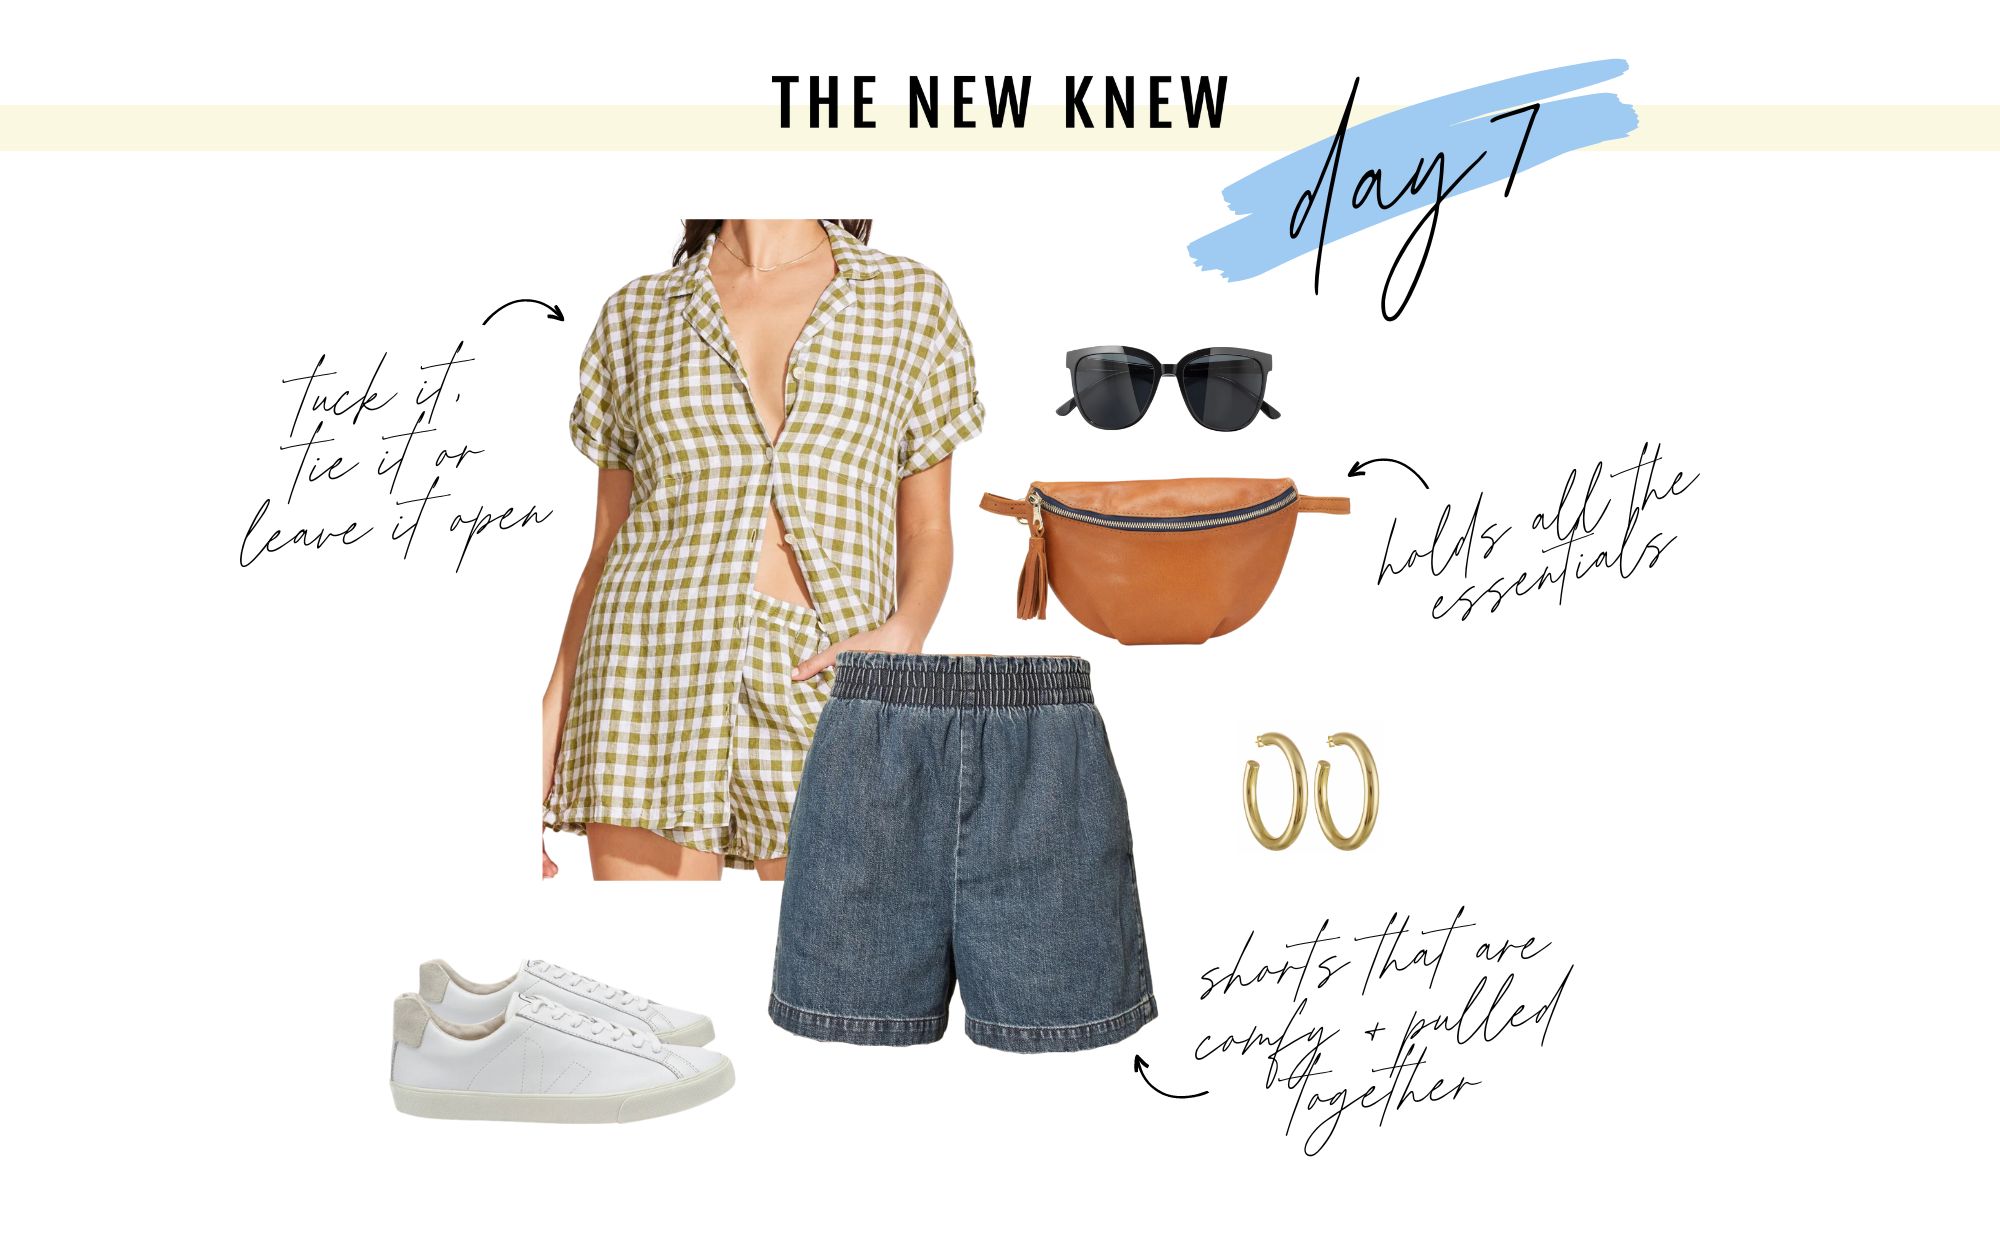 An outfit from a capsule wardrobe featuring a pair of shorts and a gingham shirt.